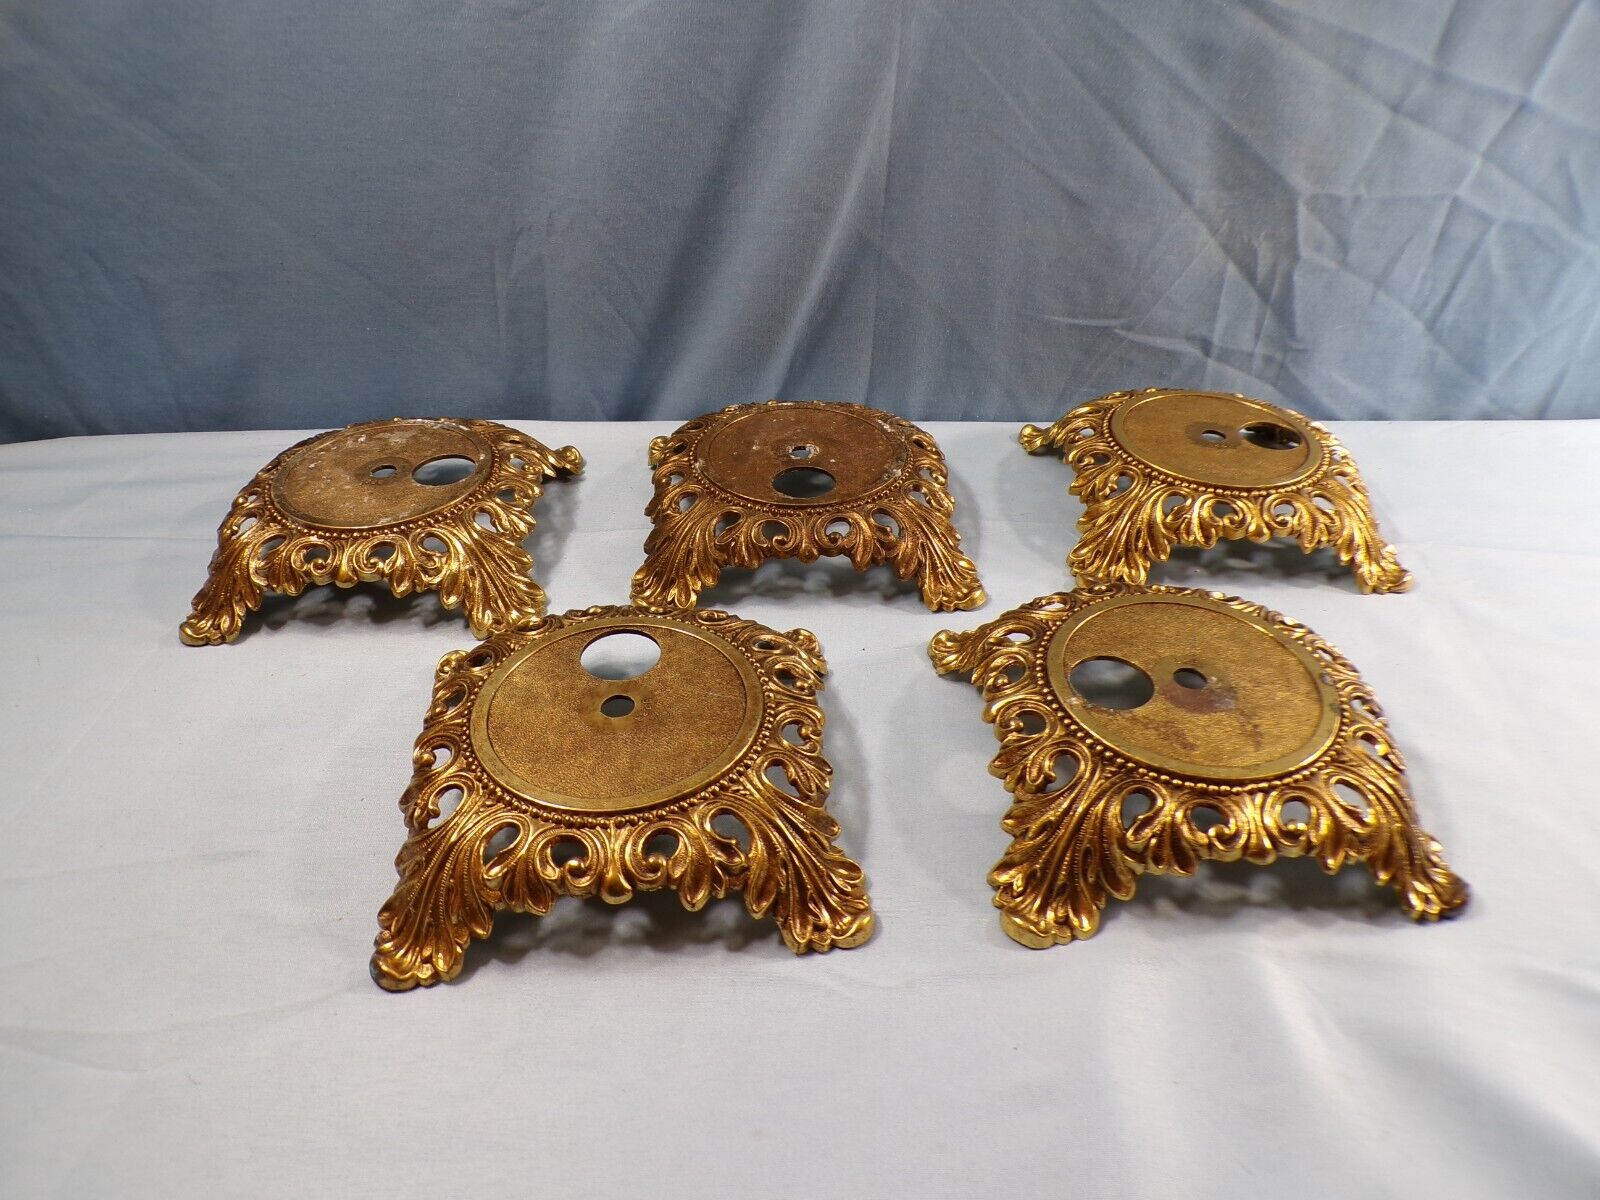 Lot of 5 Ornate Cast Metal Electric Lamp Bases Antique Brass Finish Tarnished